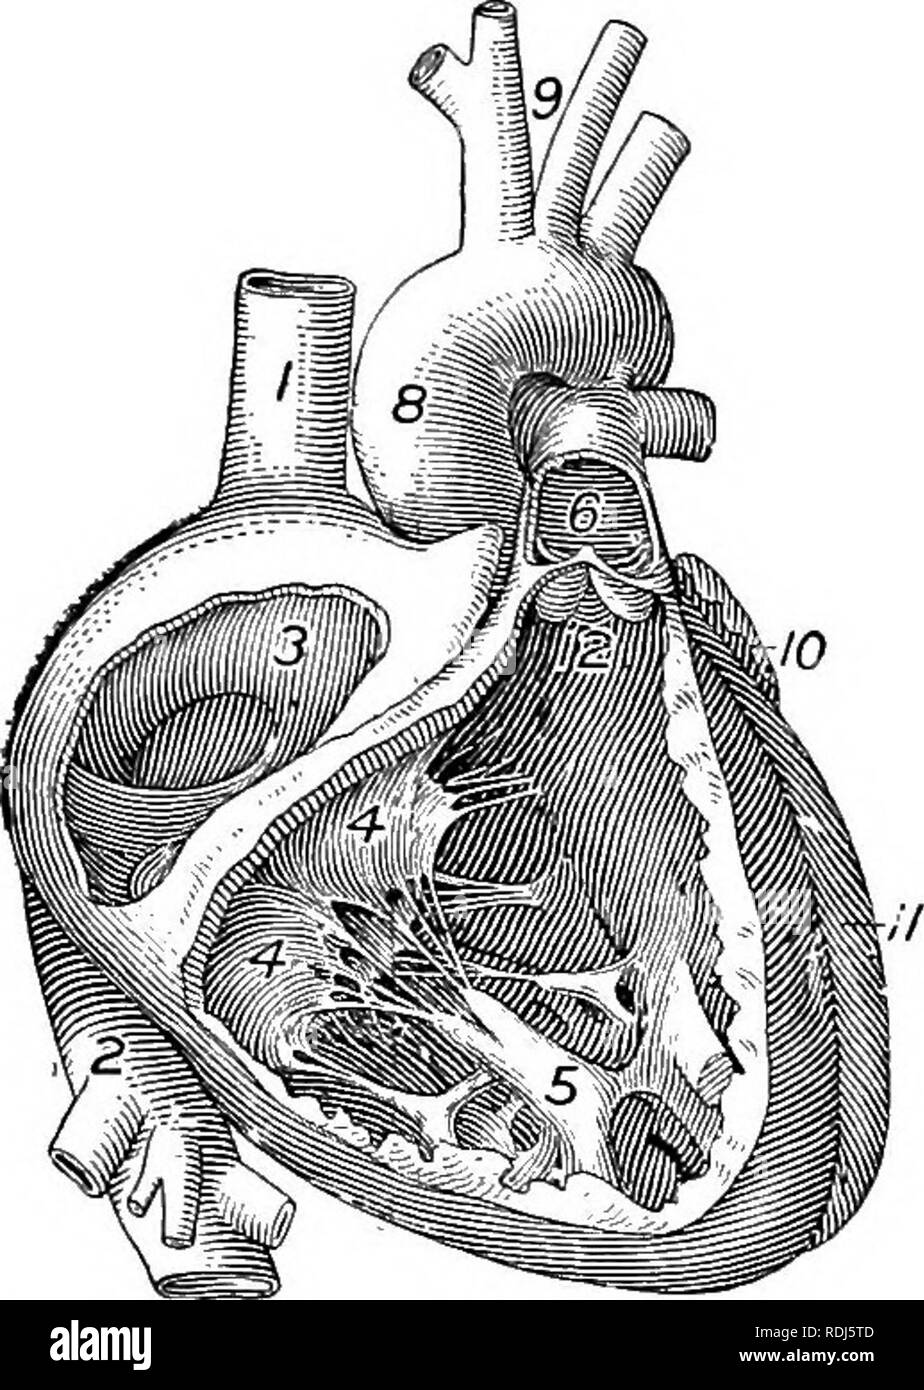 . A text-book in general physiology and anatomy. Physiology, Comparative; Anatomy. 184 CIECULATION on the surface. The two flaplike auricles at the top of the heart are separated from the ventricles by a deep groove, Mhile a shallow furrow marks the division of the right and left ventricles, and the position of the septum. On the outside may also be seen a number of large blood vessels which extend from the top of the heart. In addition to these there are smaller blood vessels (the coro- nary system) which branch over the surface of the heart and supply it with blood. The outside is also more  Stock Photo